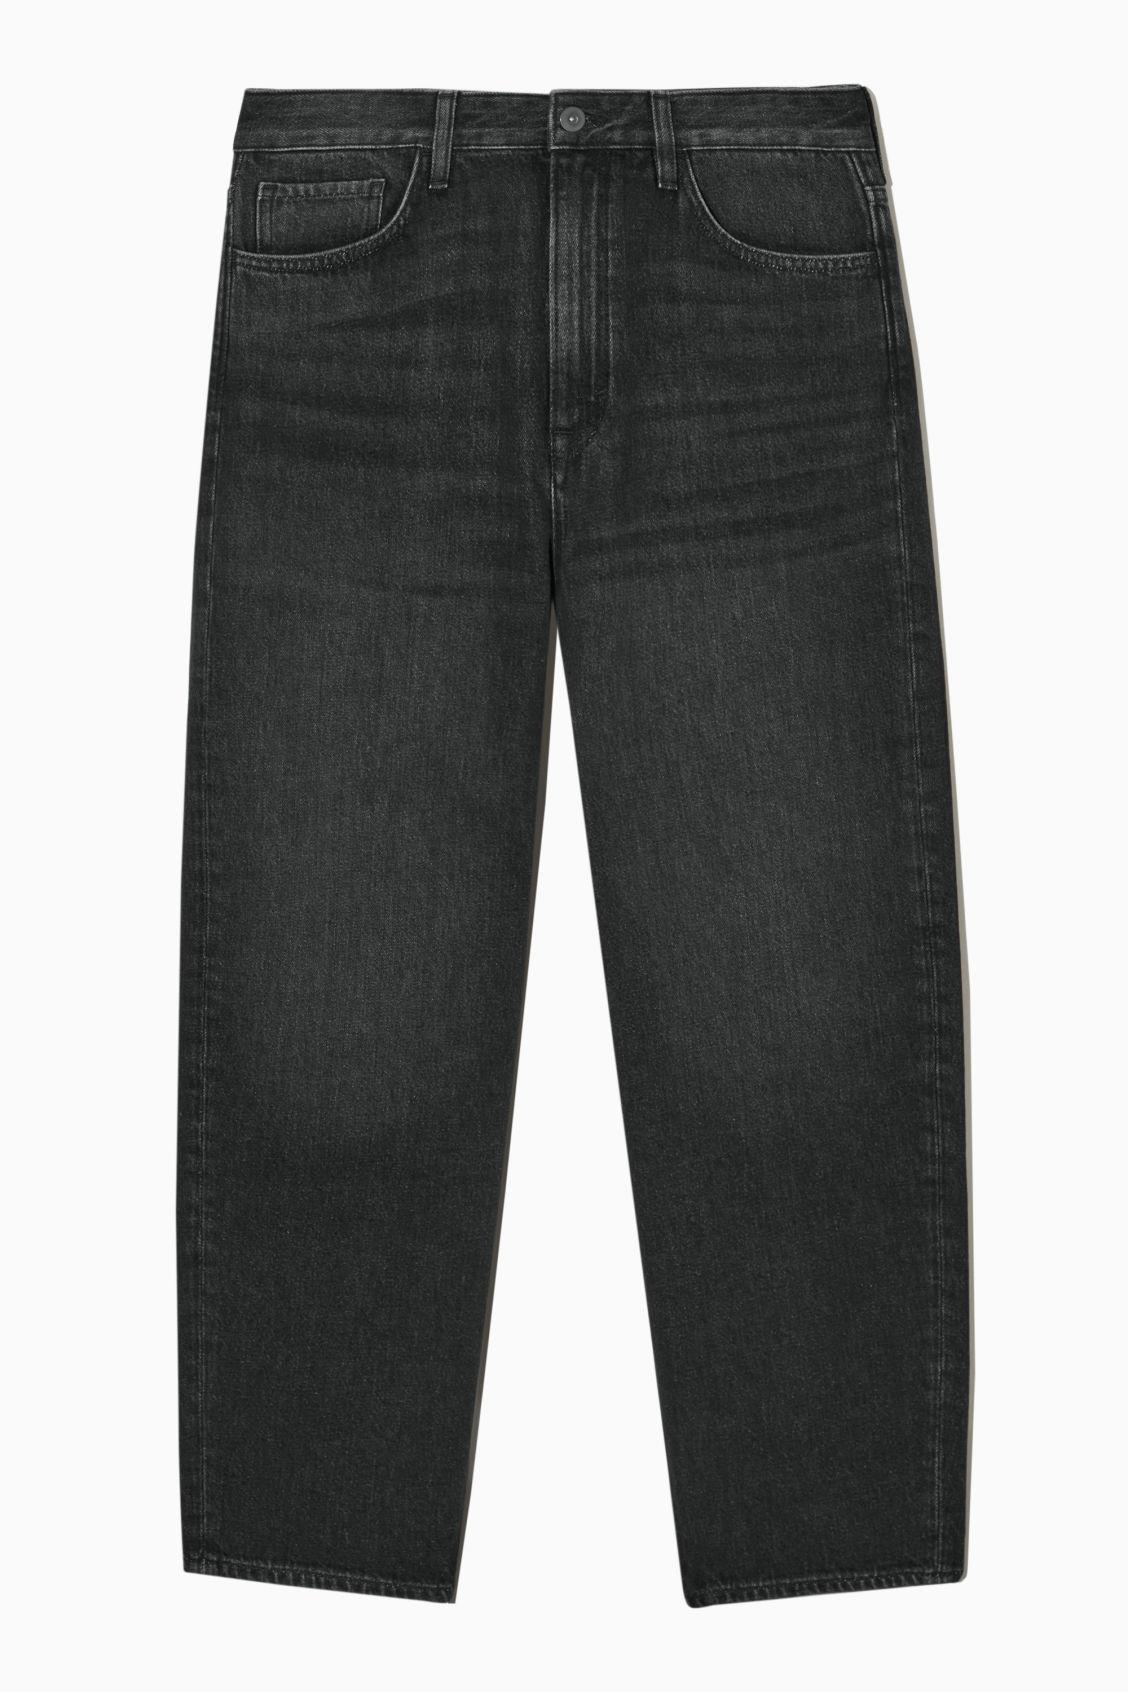 COS Tapered Ankle-length Jeans in Black | Lyst